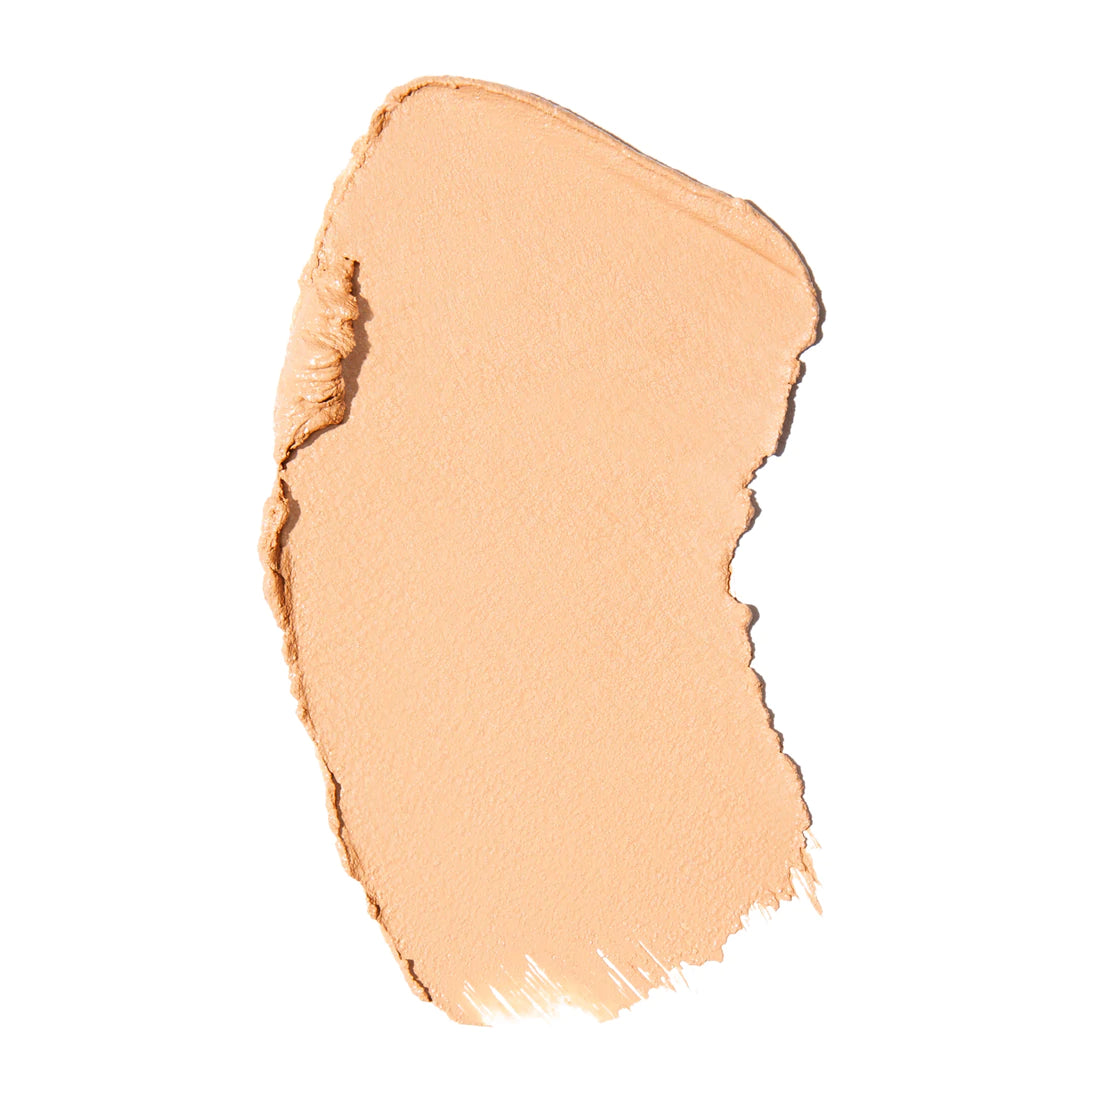 Sample of Cache Cream KEEN - Foundation & Concealer by Carlucce